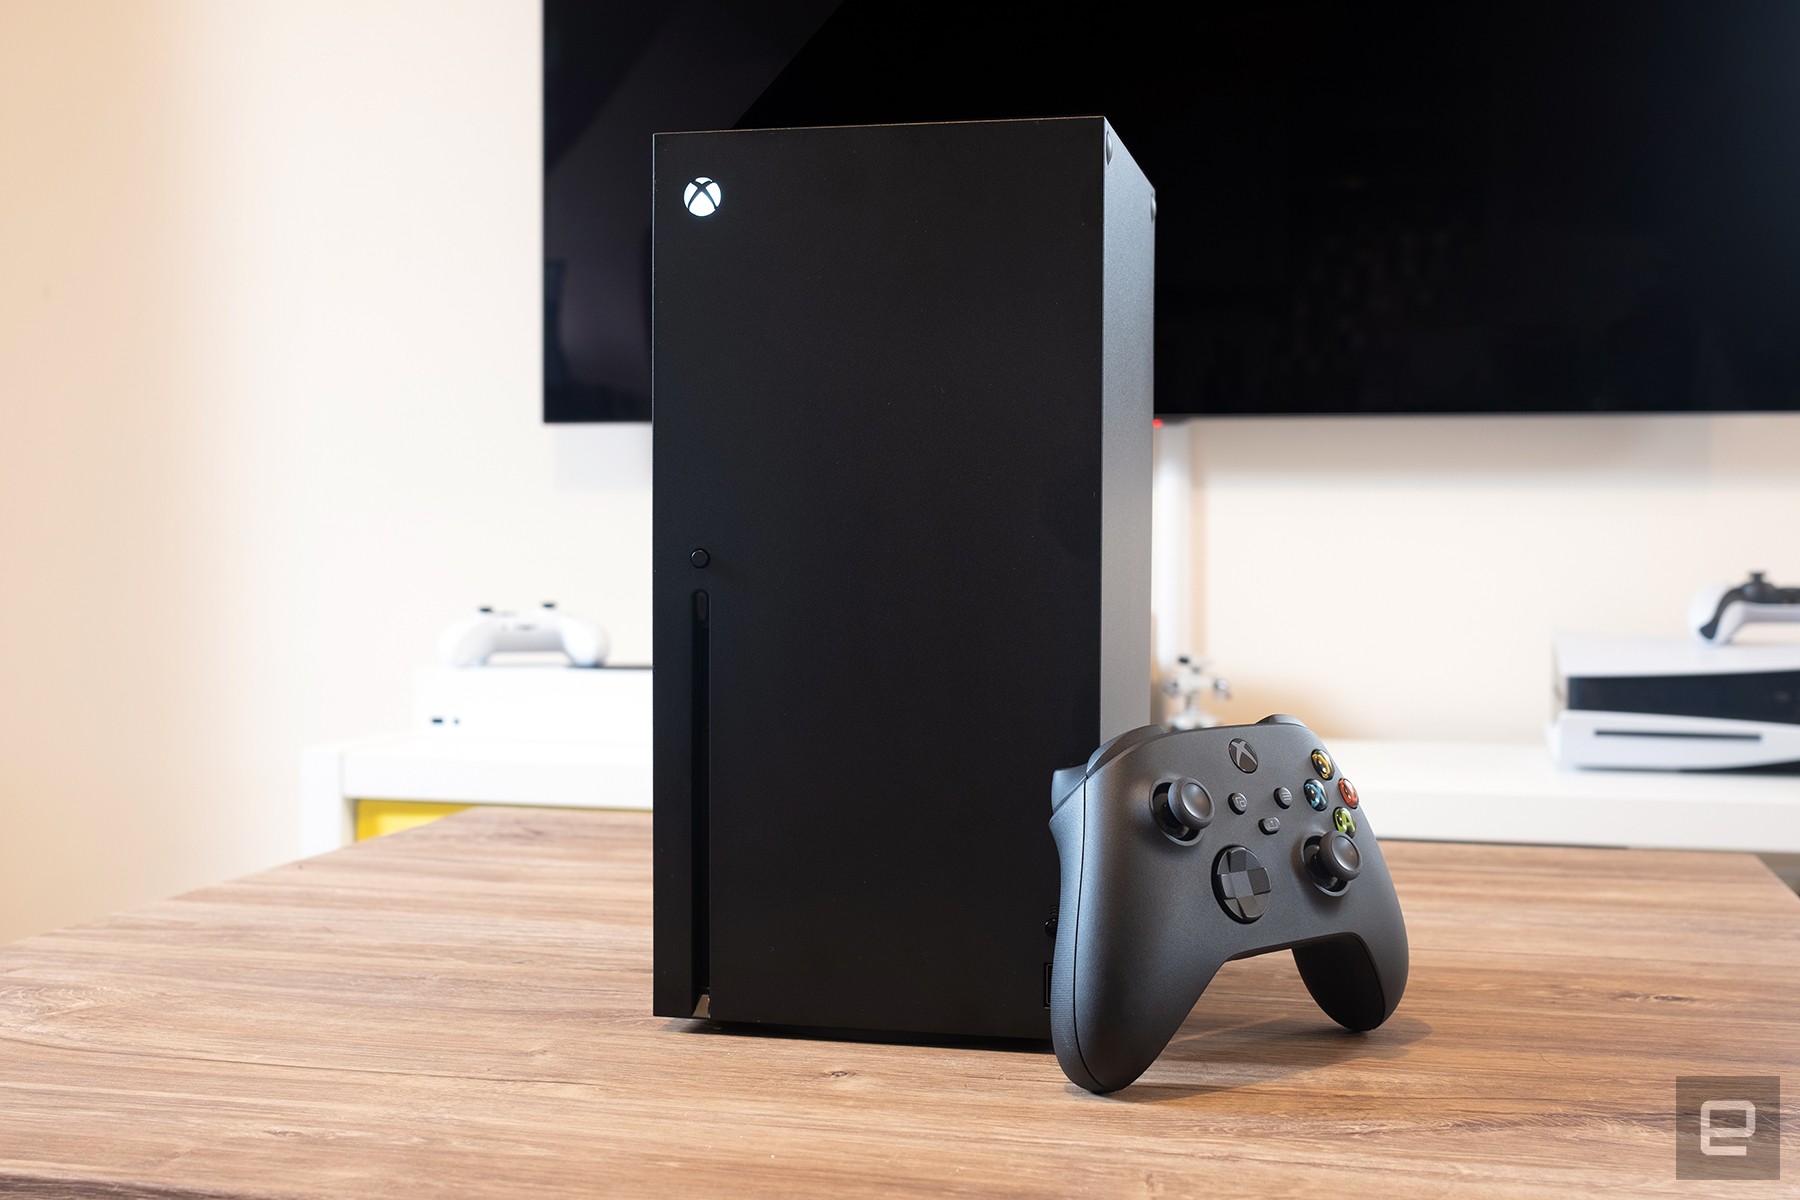 Game discs for Xbox One on Xbox Series X can now run offline